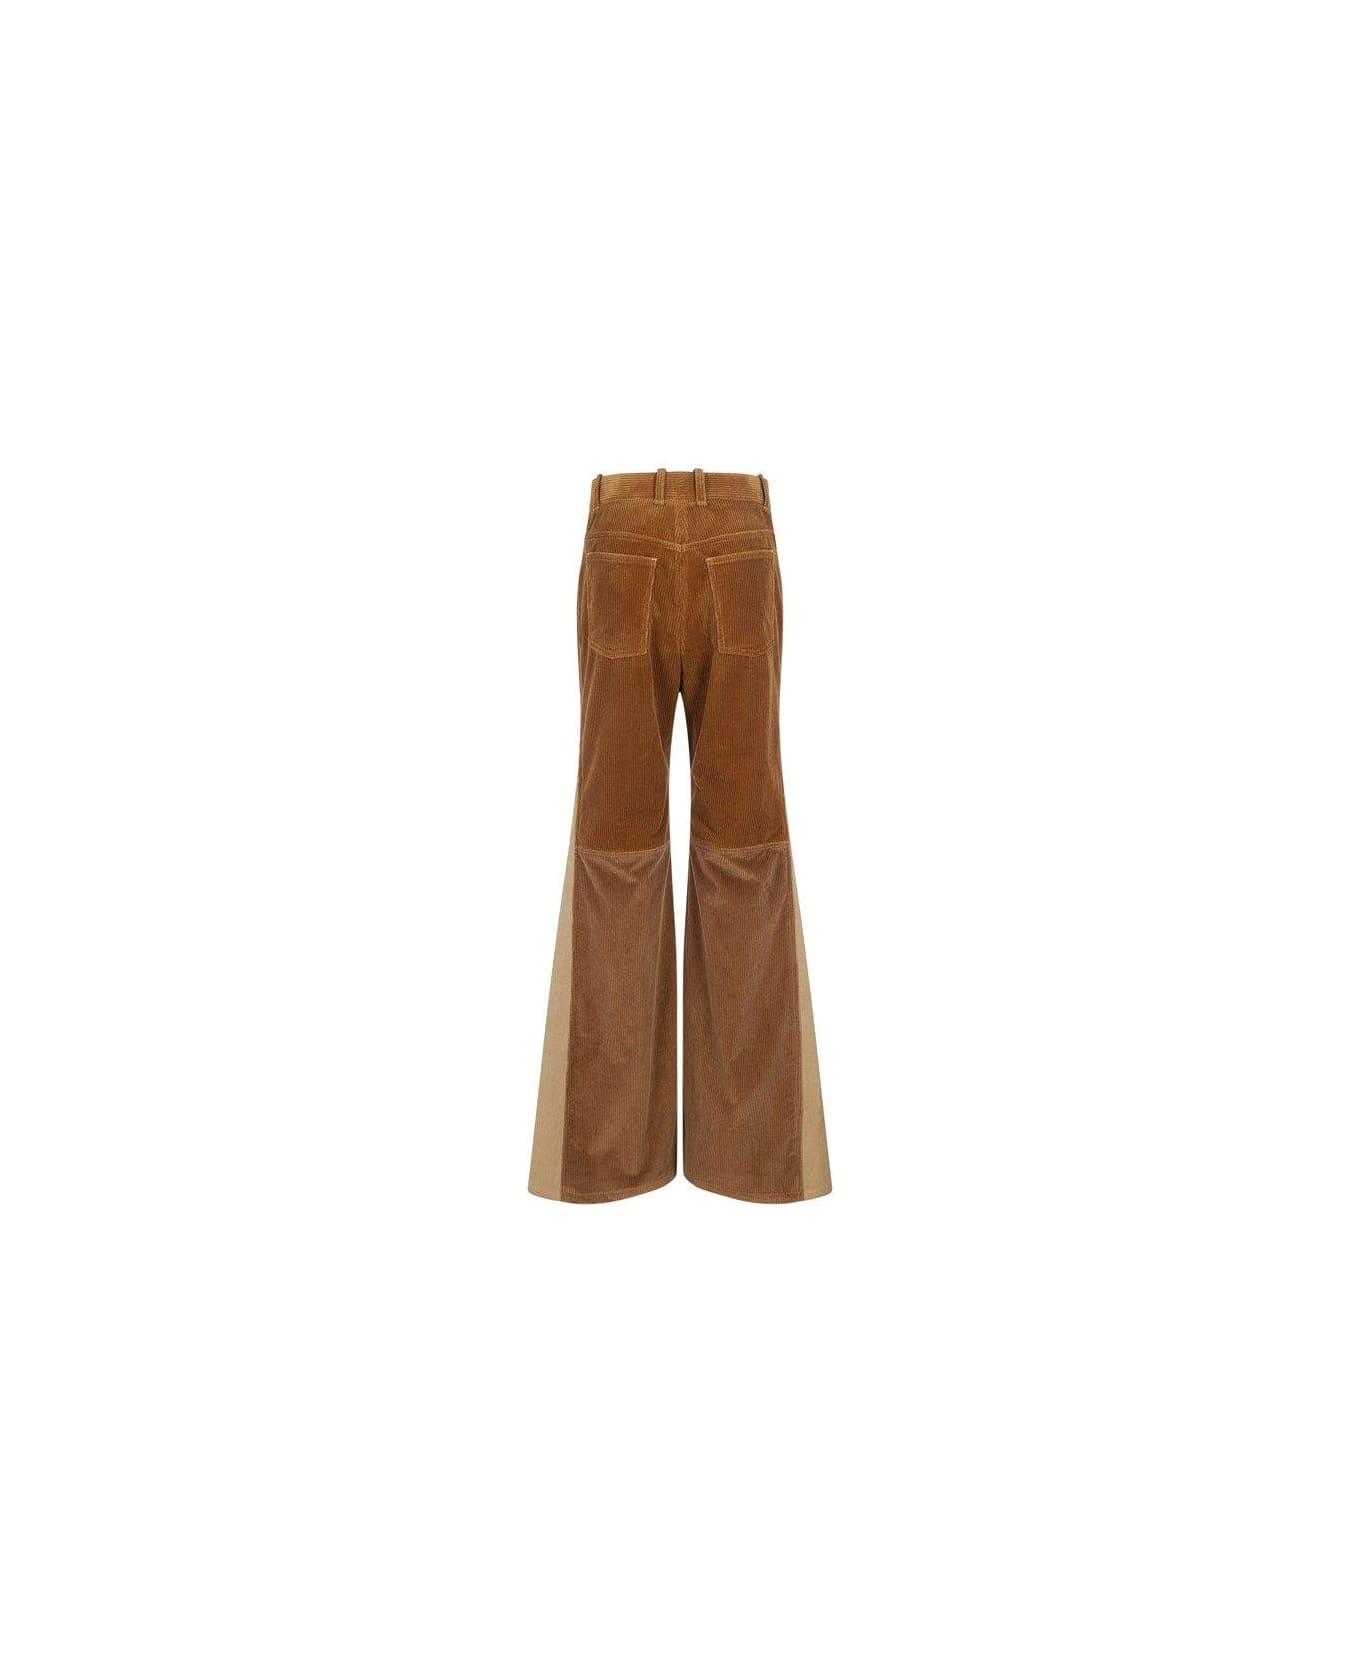 Chloé Patchwork Flared Trousers - Brown ボトムス